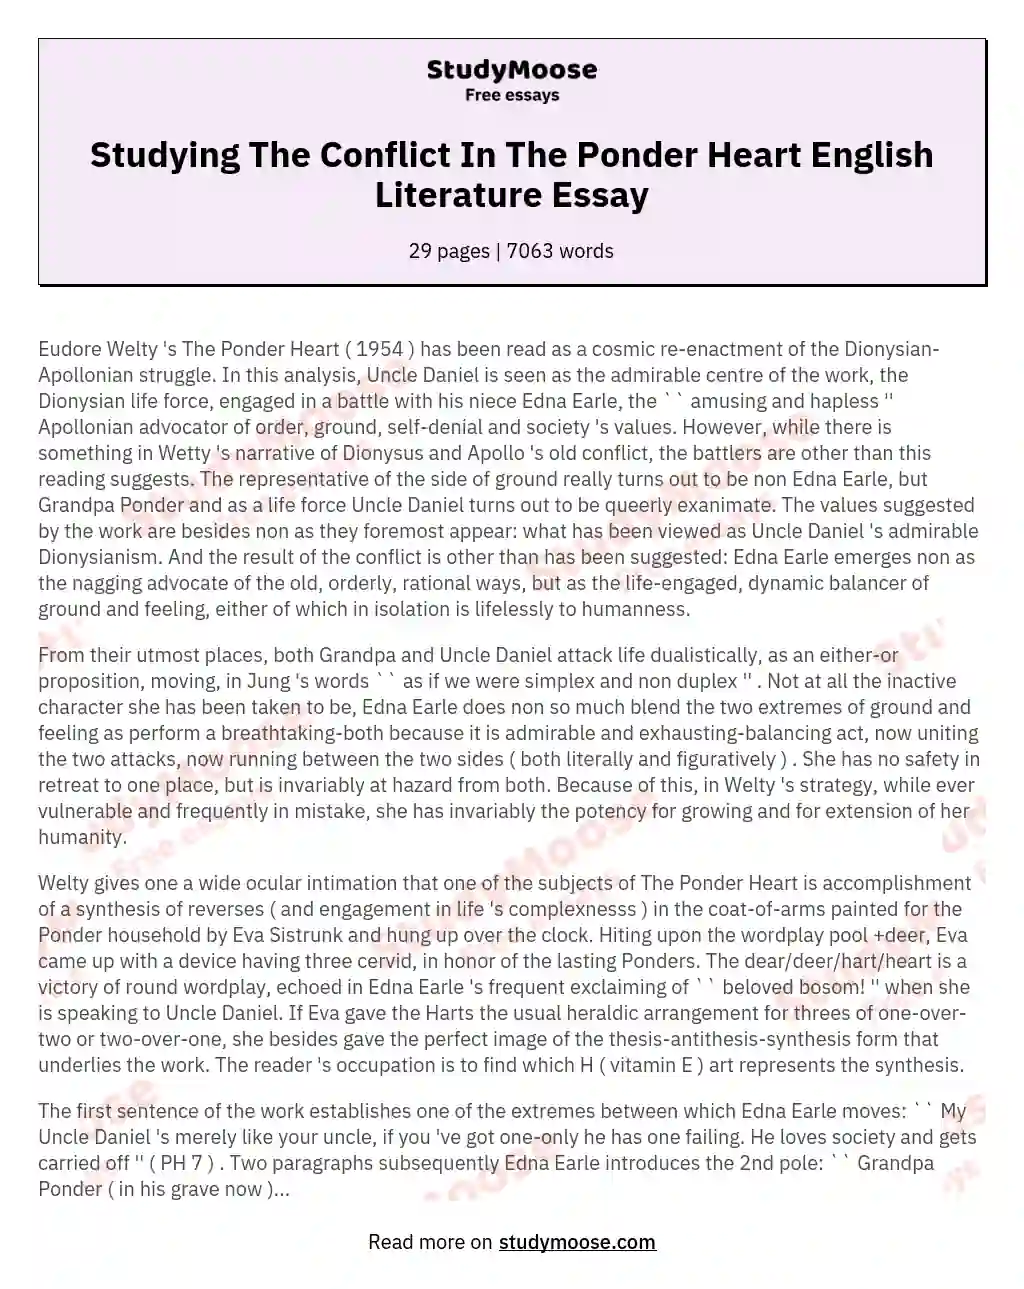 Studying The Conflict In The Ponder Heart English Literature Essay